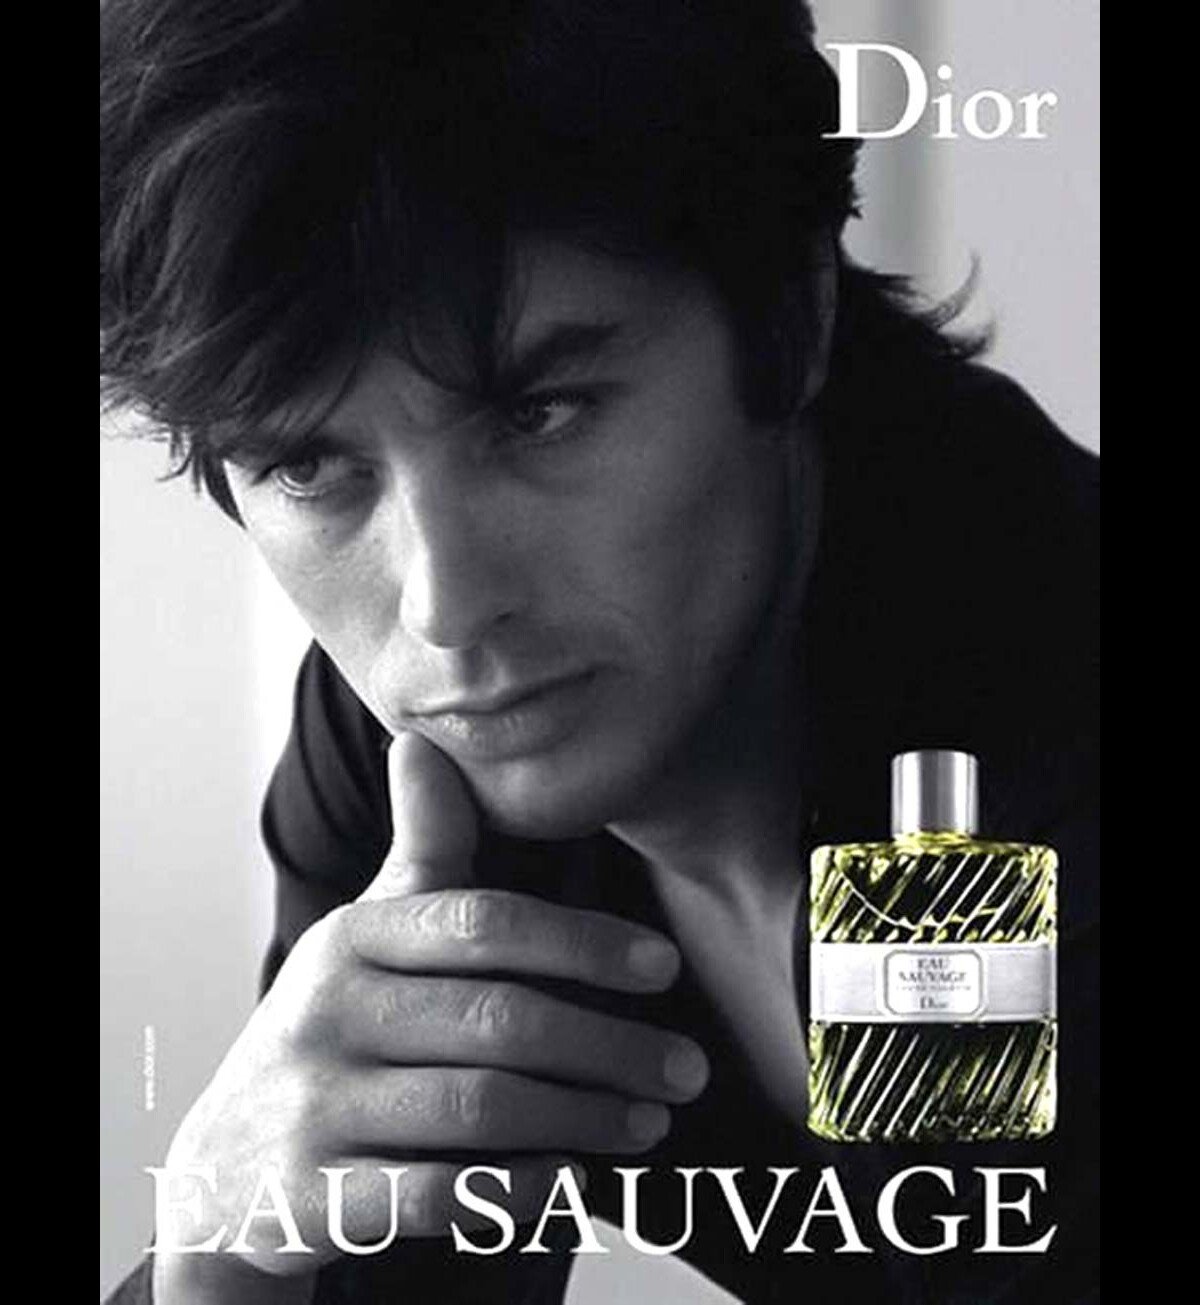 Alain Delon for Eau Sauvage by Christian Dior Movie Poster 2009